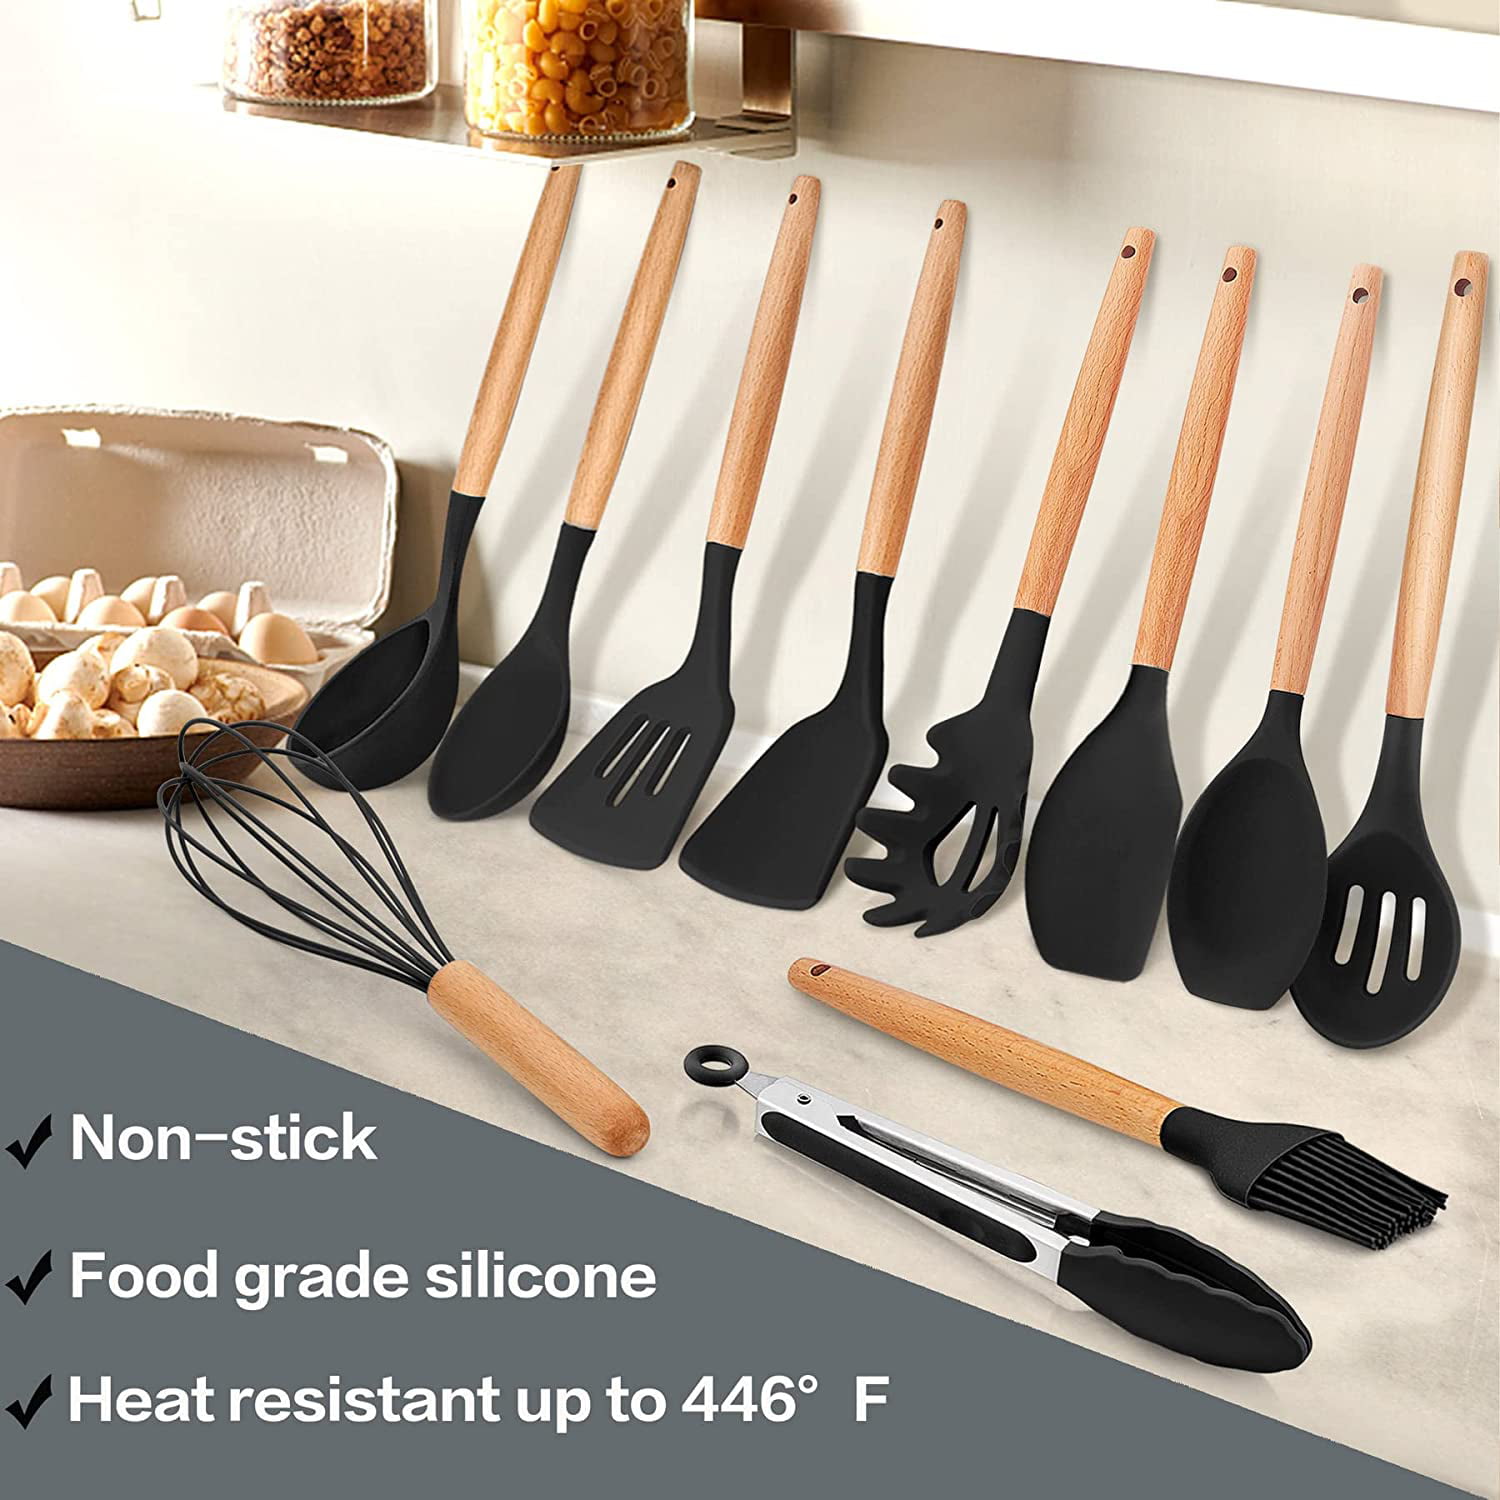 Kitchen Cooking Utensils Set, 33 pcs Non-stick Silicone Cooking